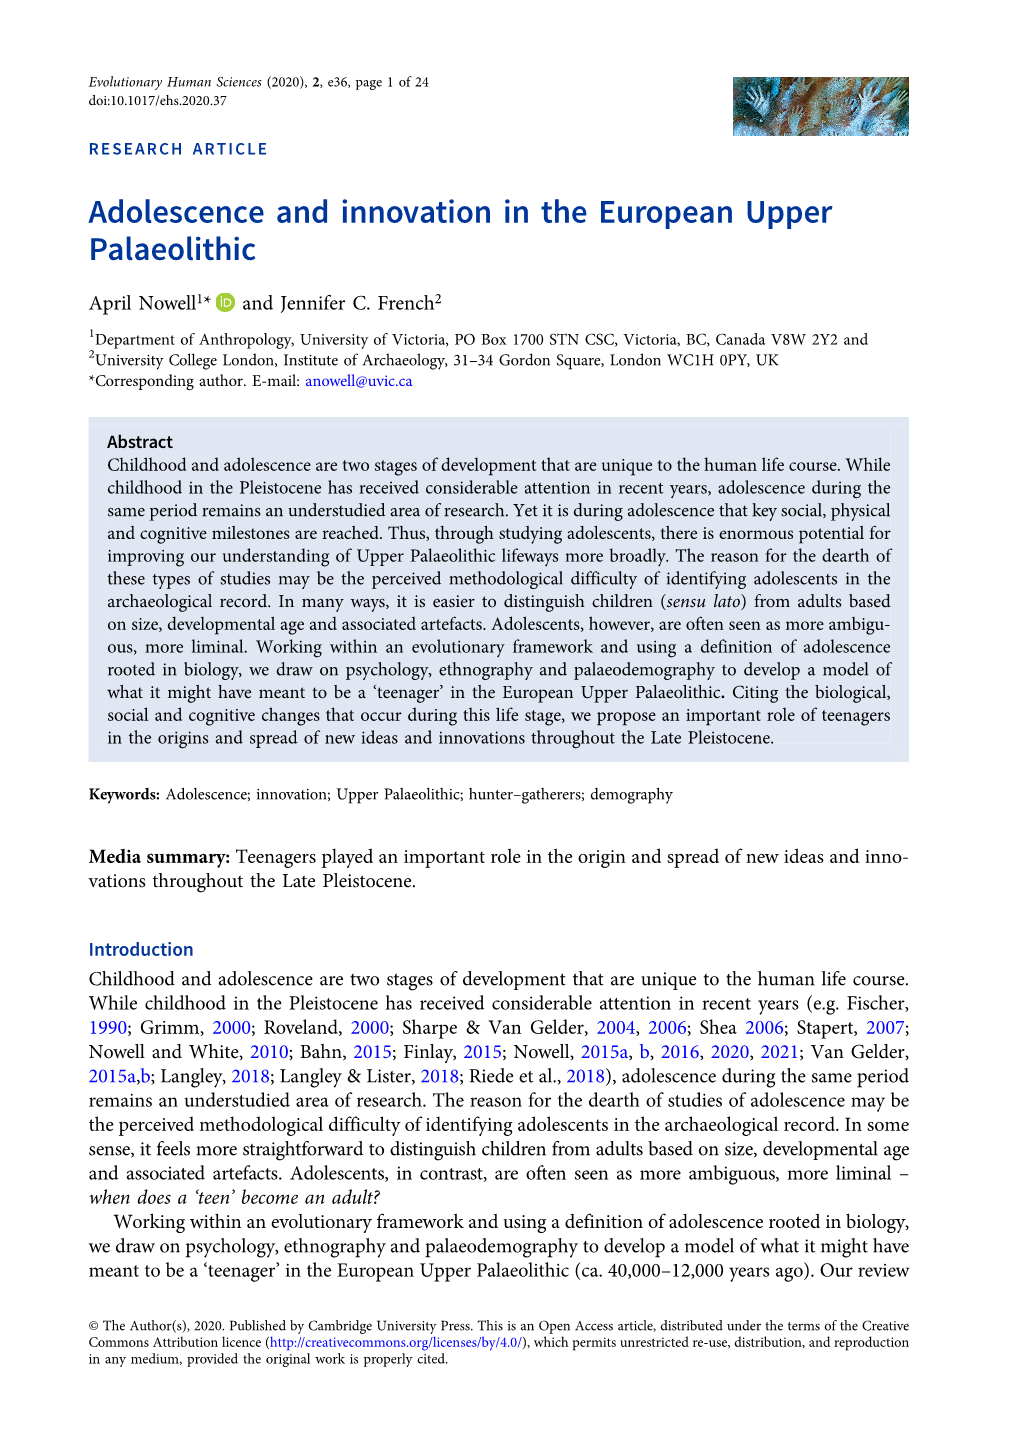 Adolescence and Innovation in the European Upper Palaeolithic